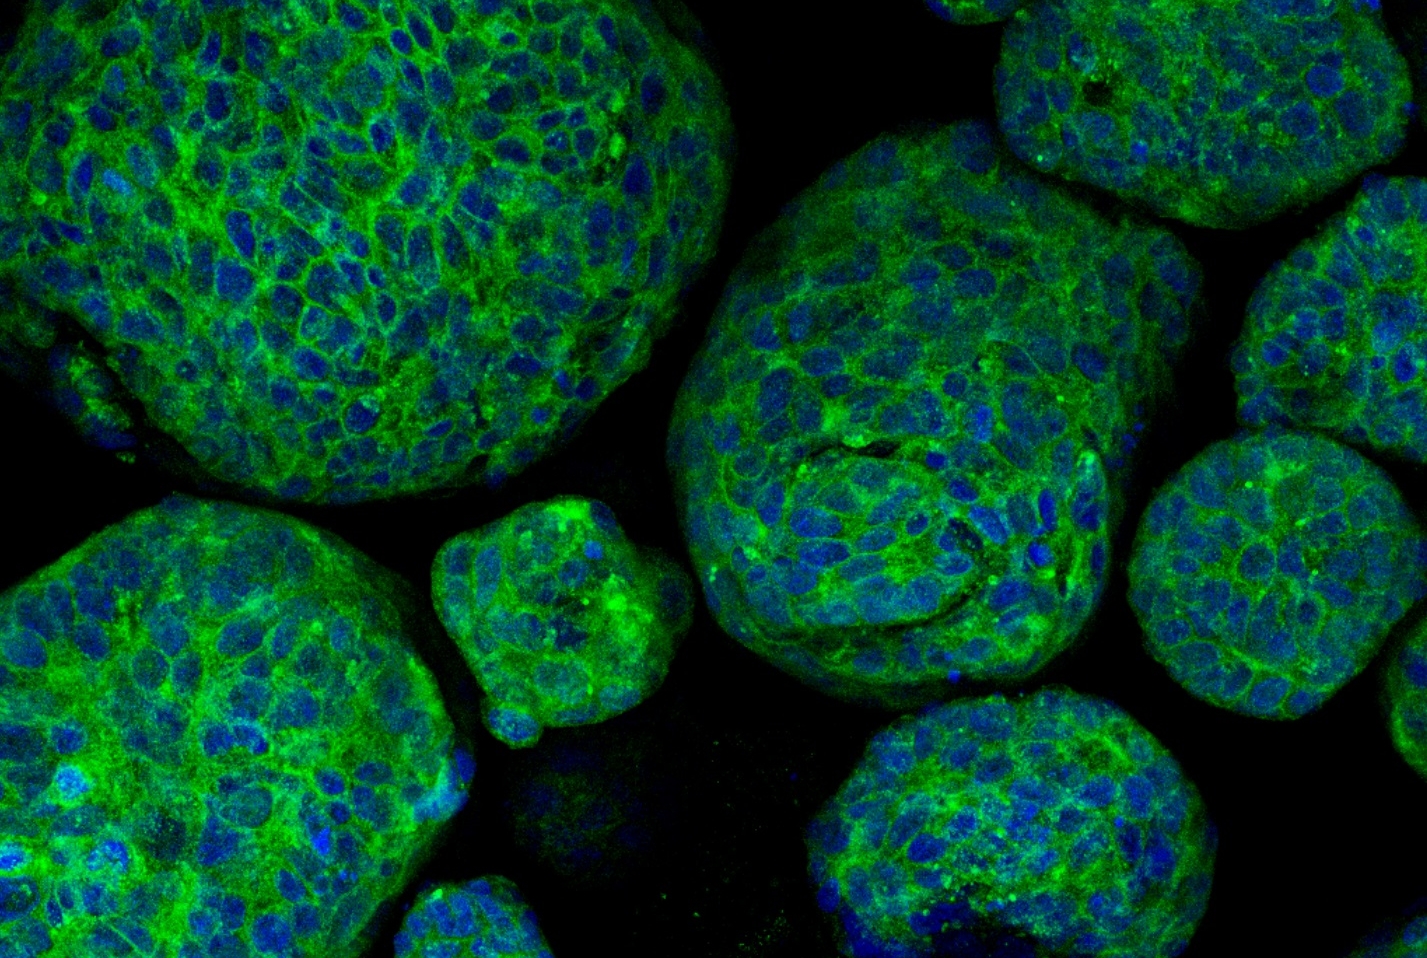 Image of prostate cancer organoids demonstrating expression of synaptophysin (stained in green), a marker protein for neuroendocrine cells.